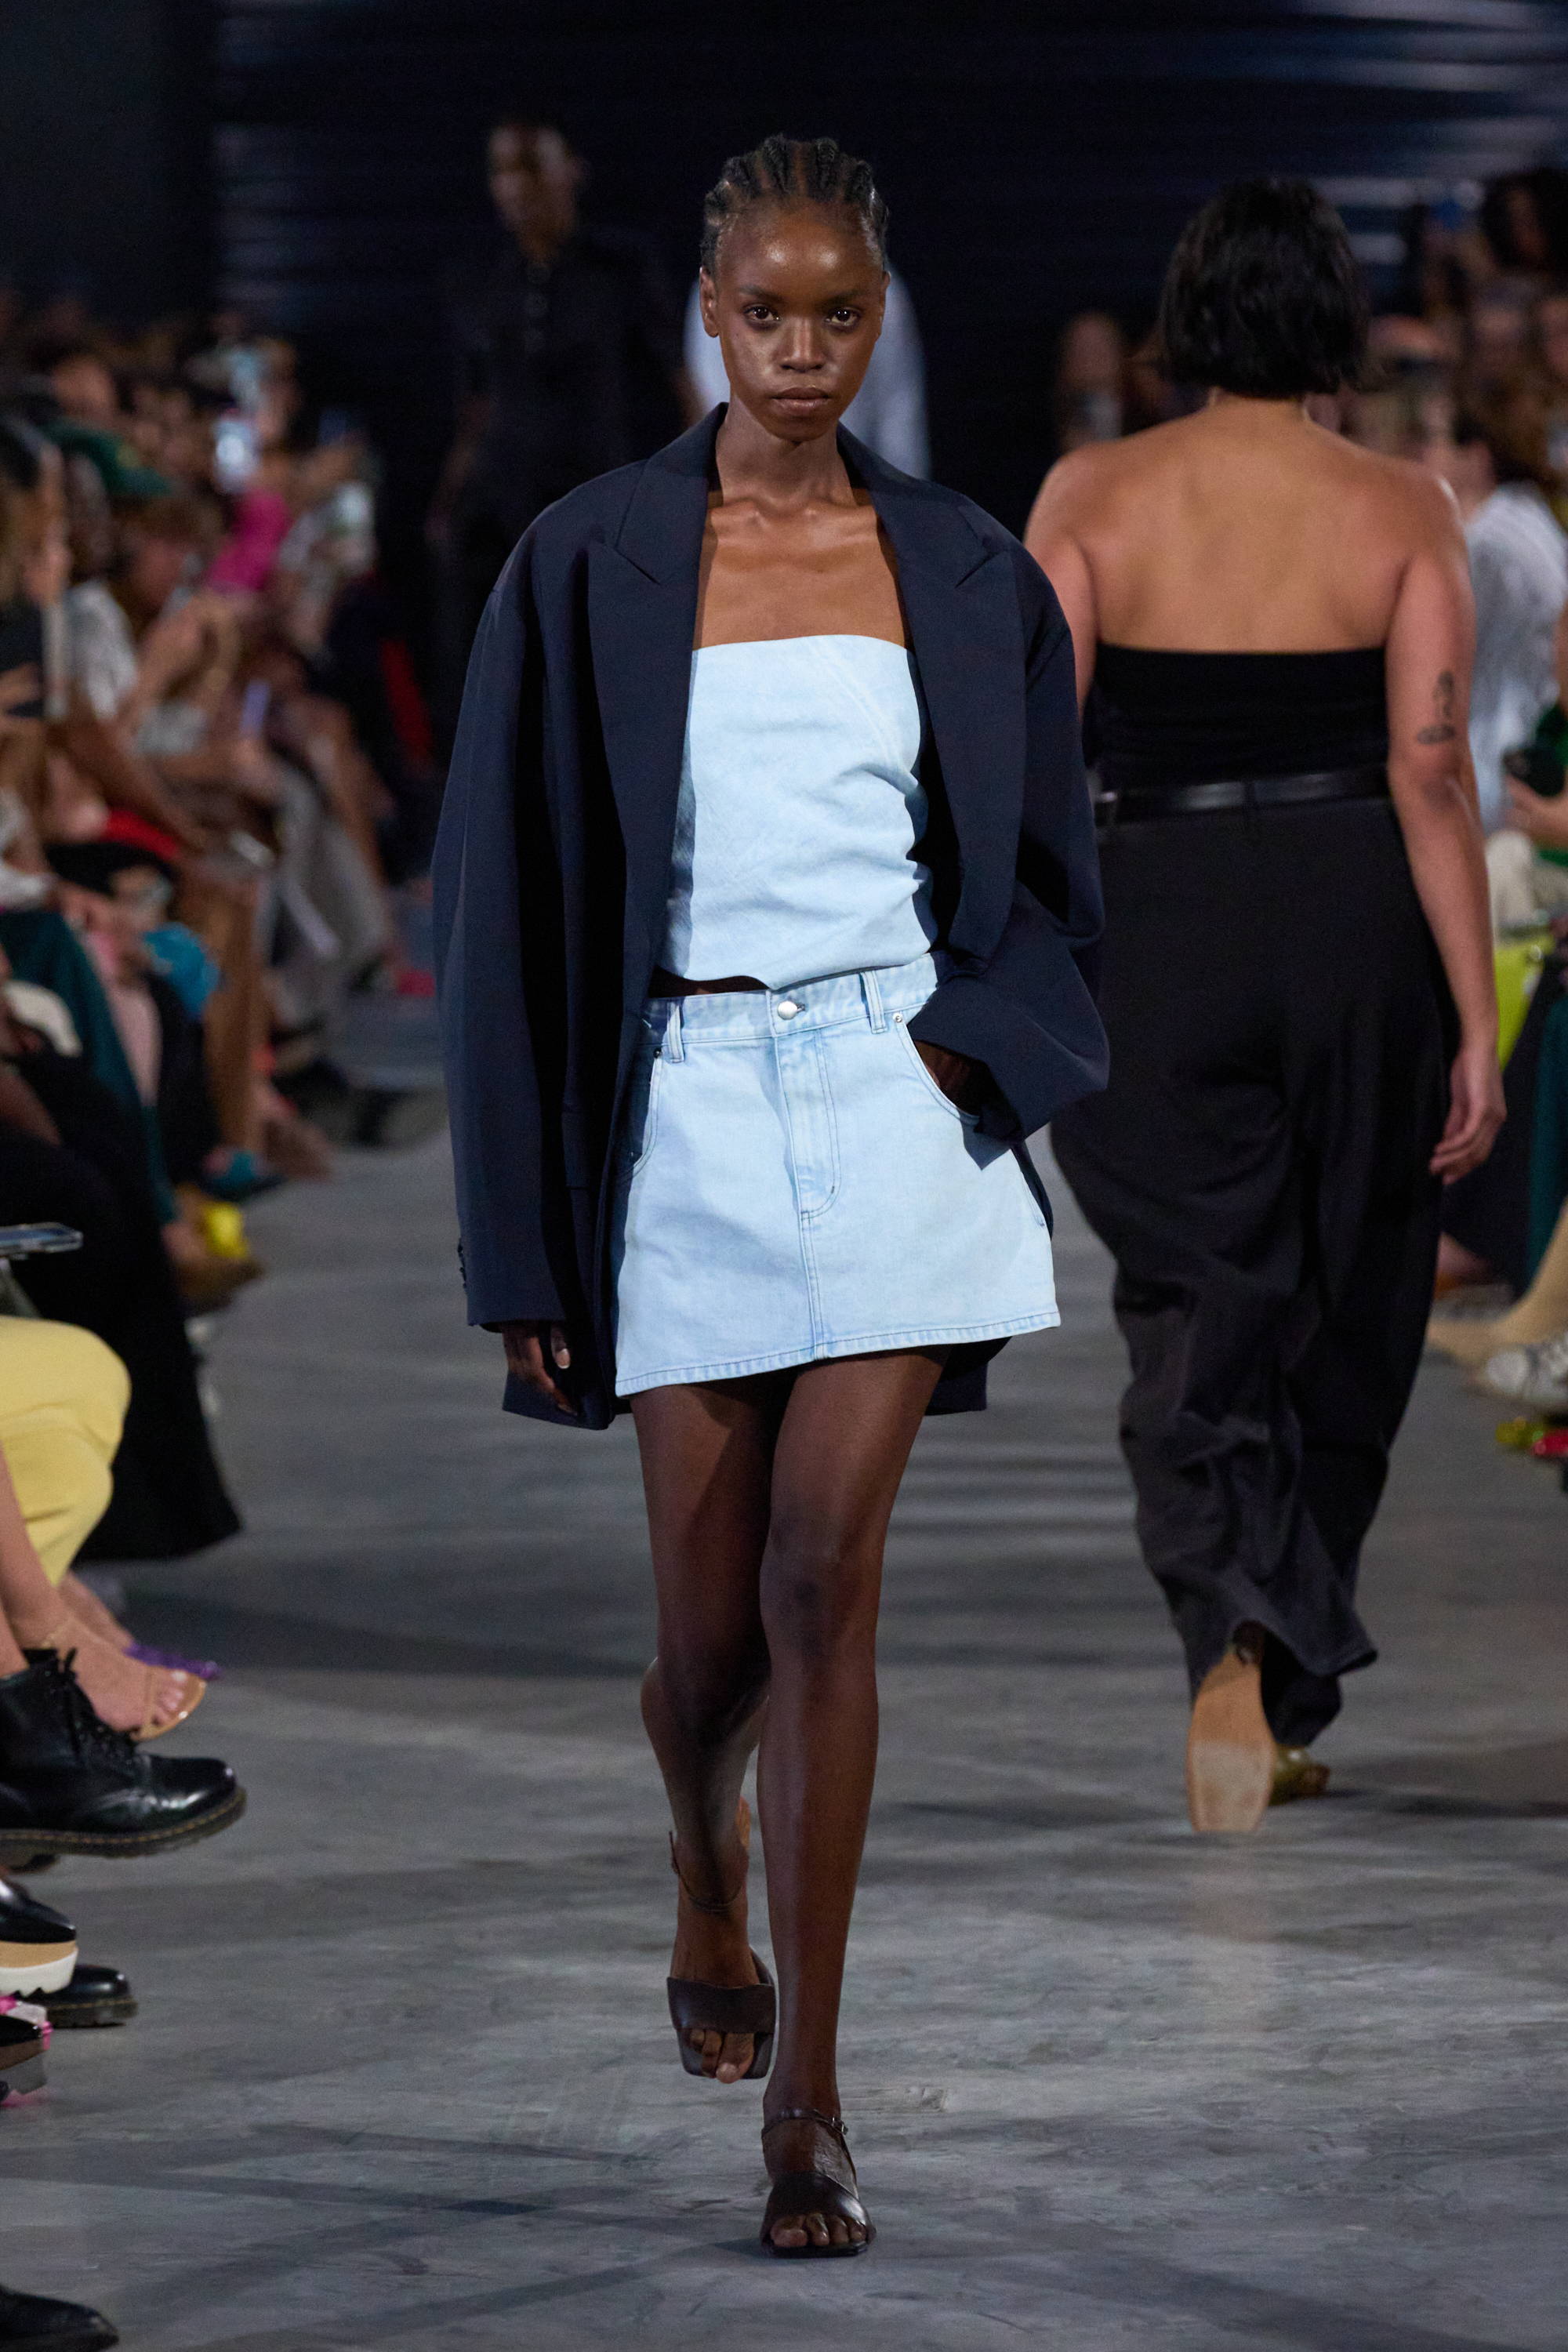 Model on a runway wearing denim top and skirt with blazer